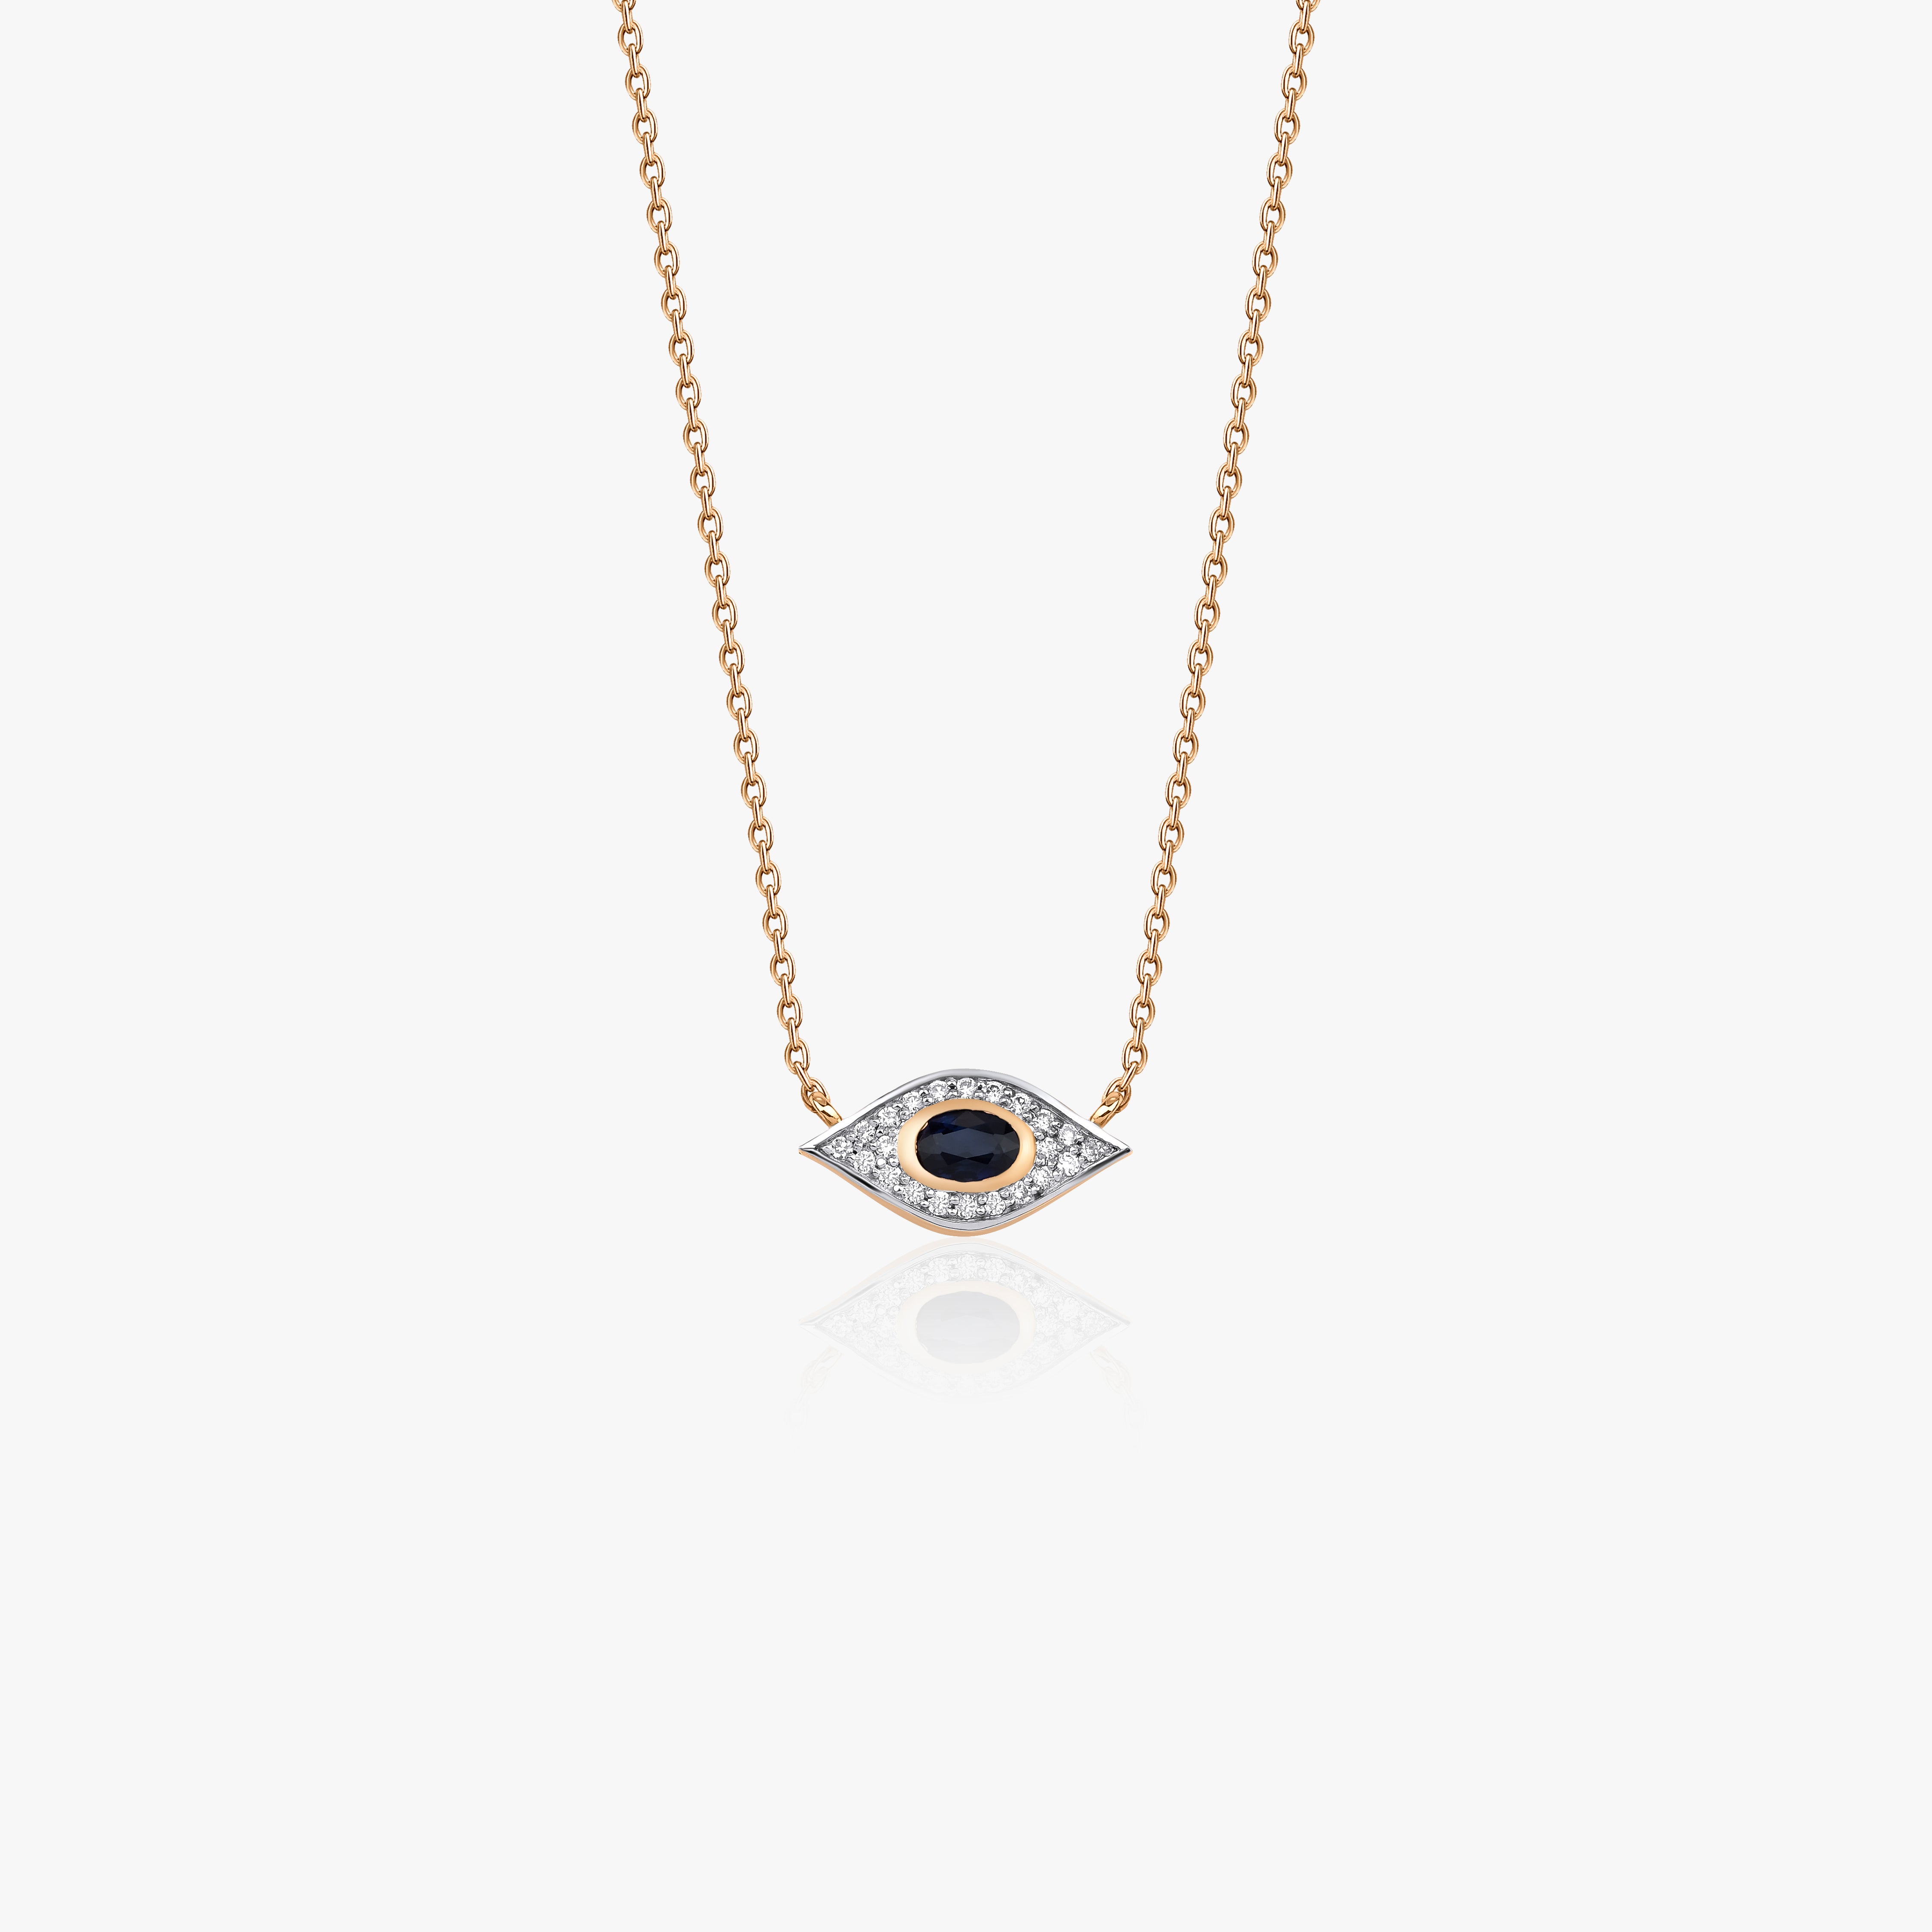 Blue Sapphire and Diamond Evil Eye Necklace Available in 14K and 18K Gold